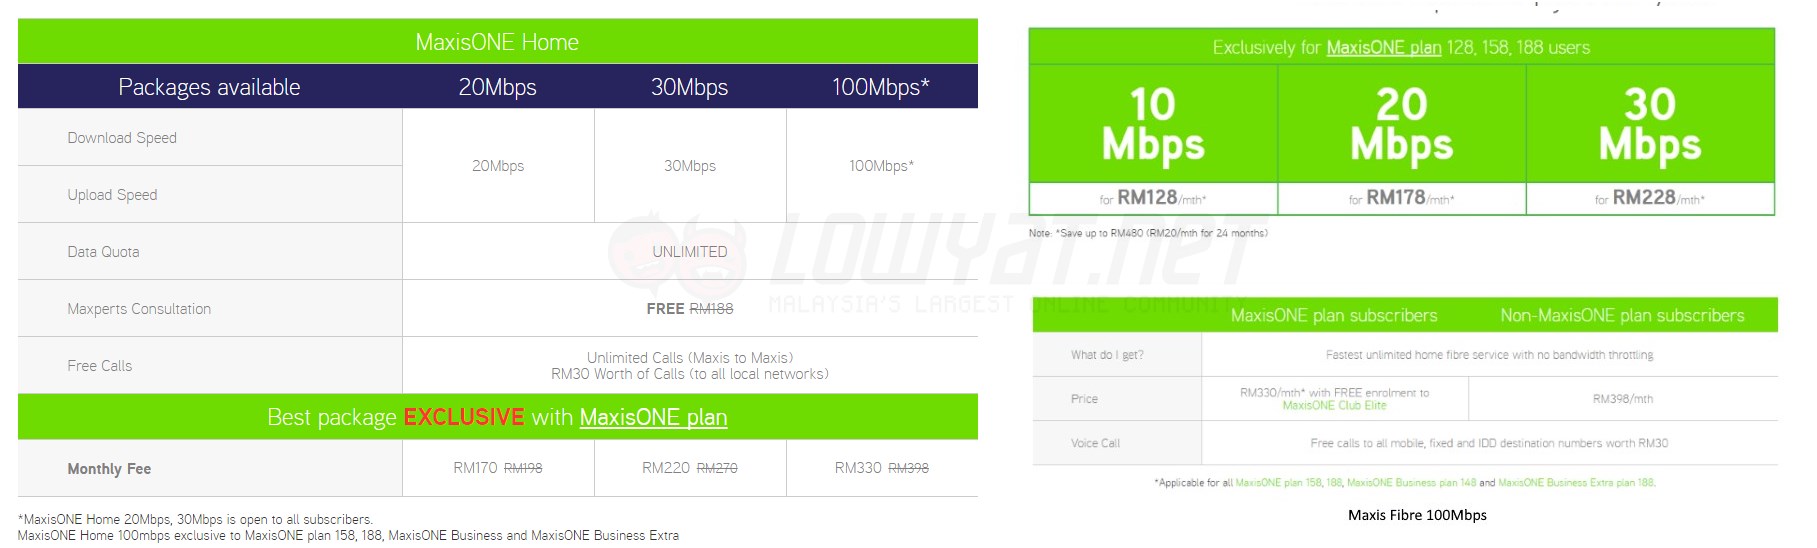 Maxisone Home Fibre Goes Official Featuring Maxperts Starts At 20mbps Lowyat Net